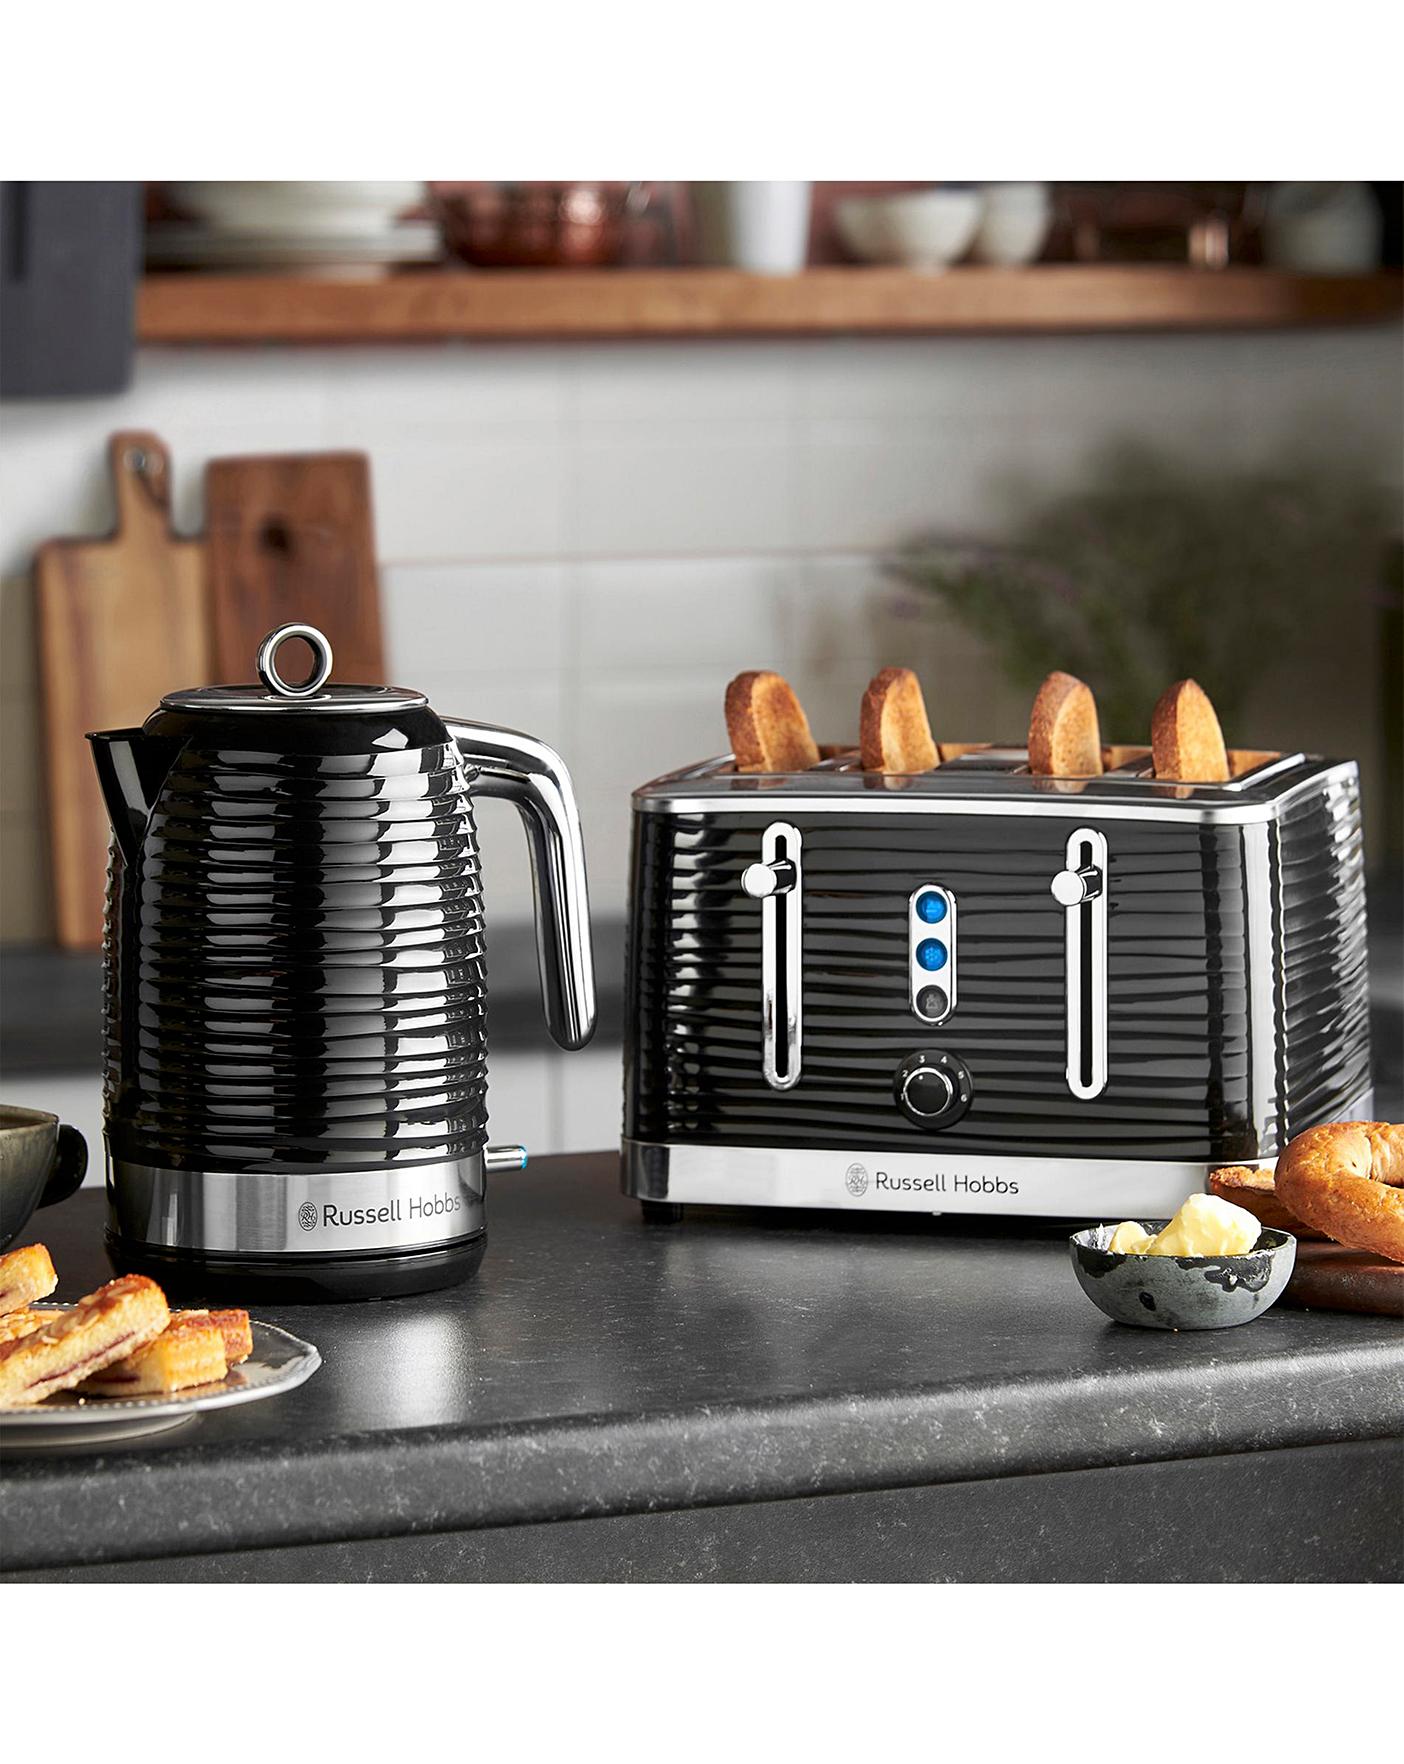 Kettle Toaster Set Black Chrome Accents Cheap Russell Hobbs Kitchen Feb Sale